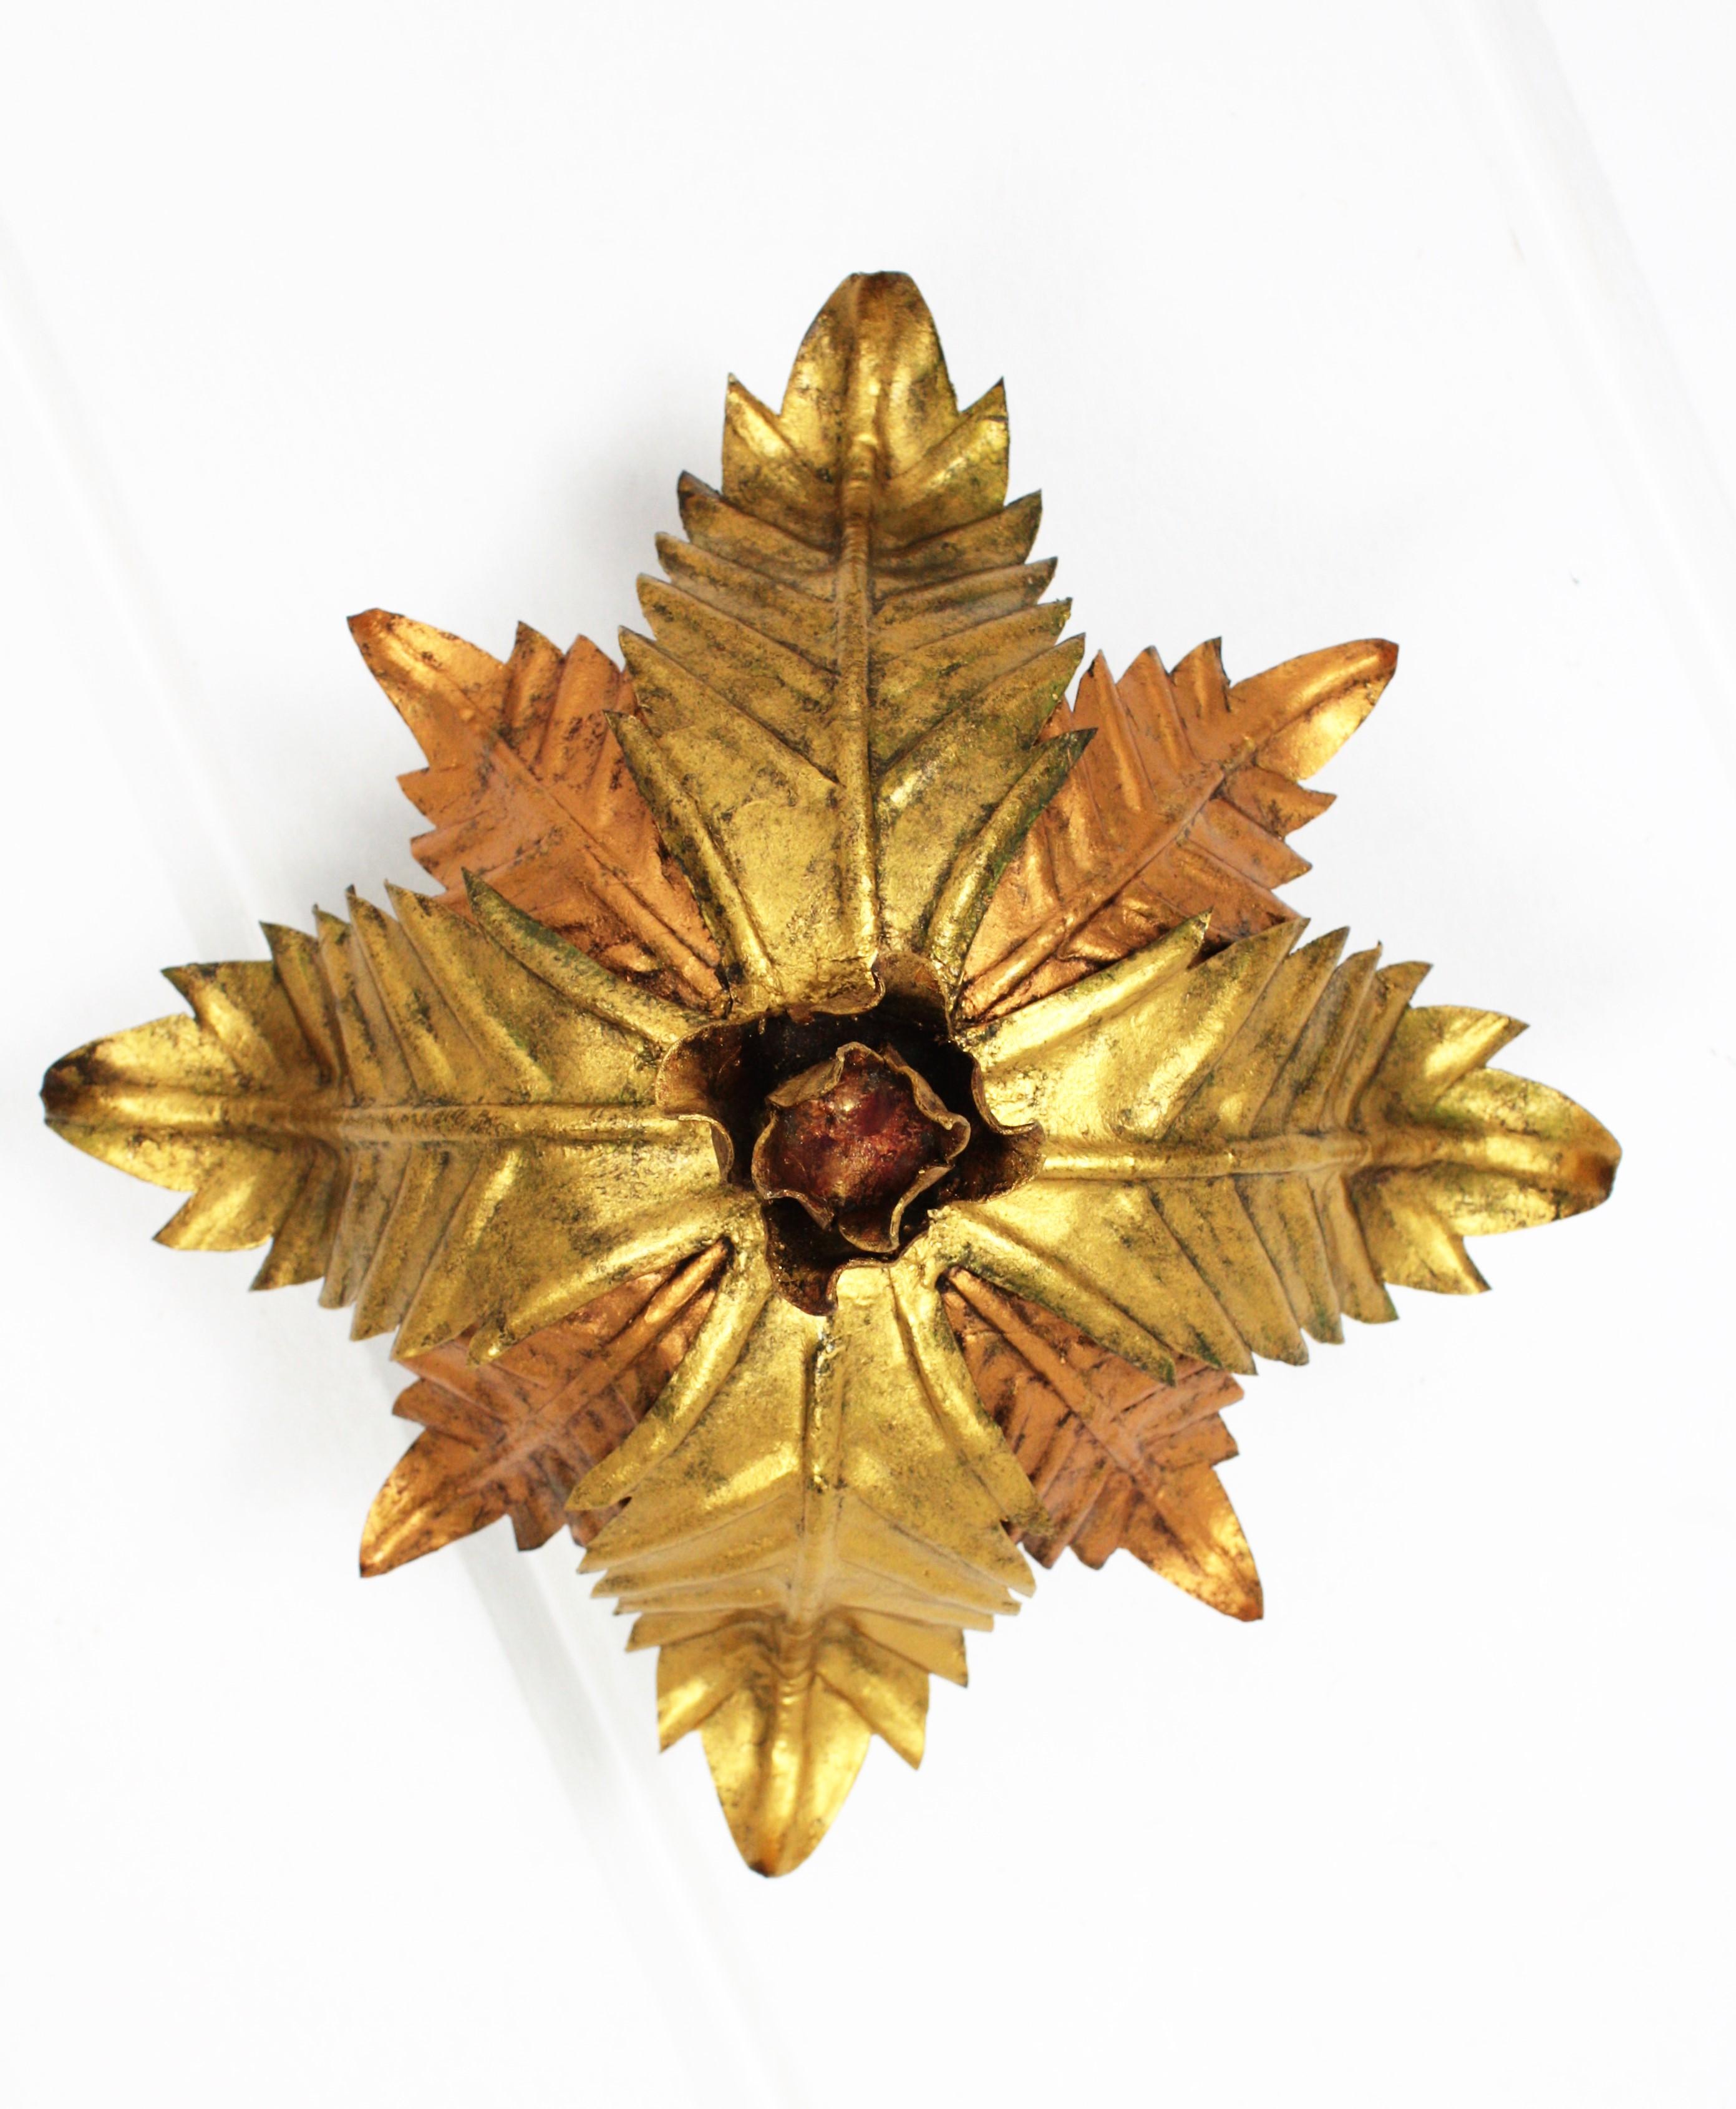 Hollywood Regency Sunburst Foliage Floral Light Fixture in Two-Tone Gilt Wrought Iron, 1950s